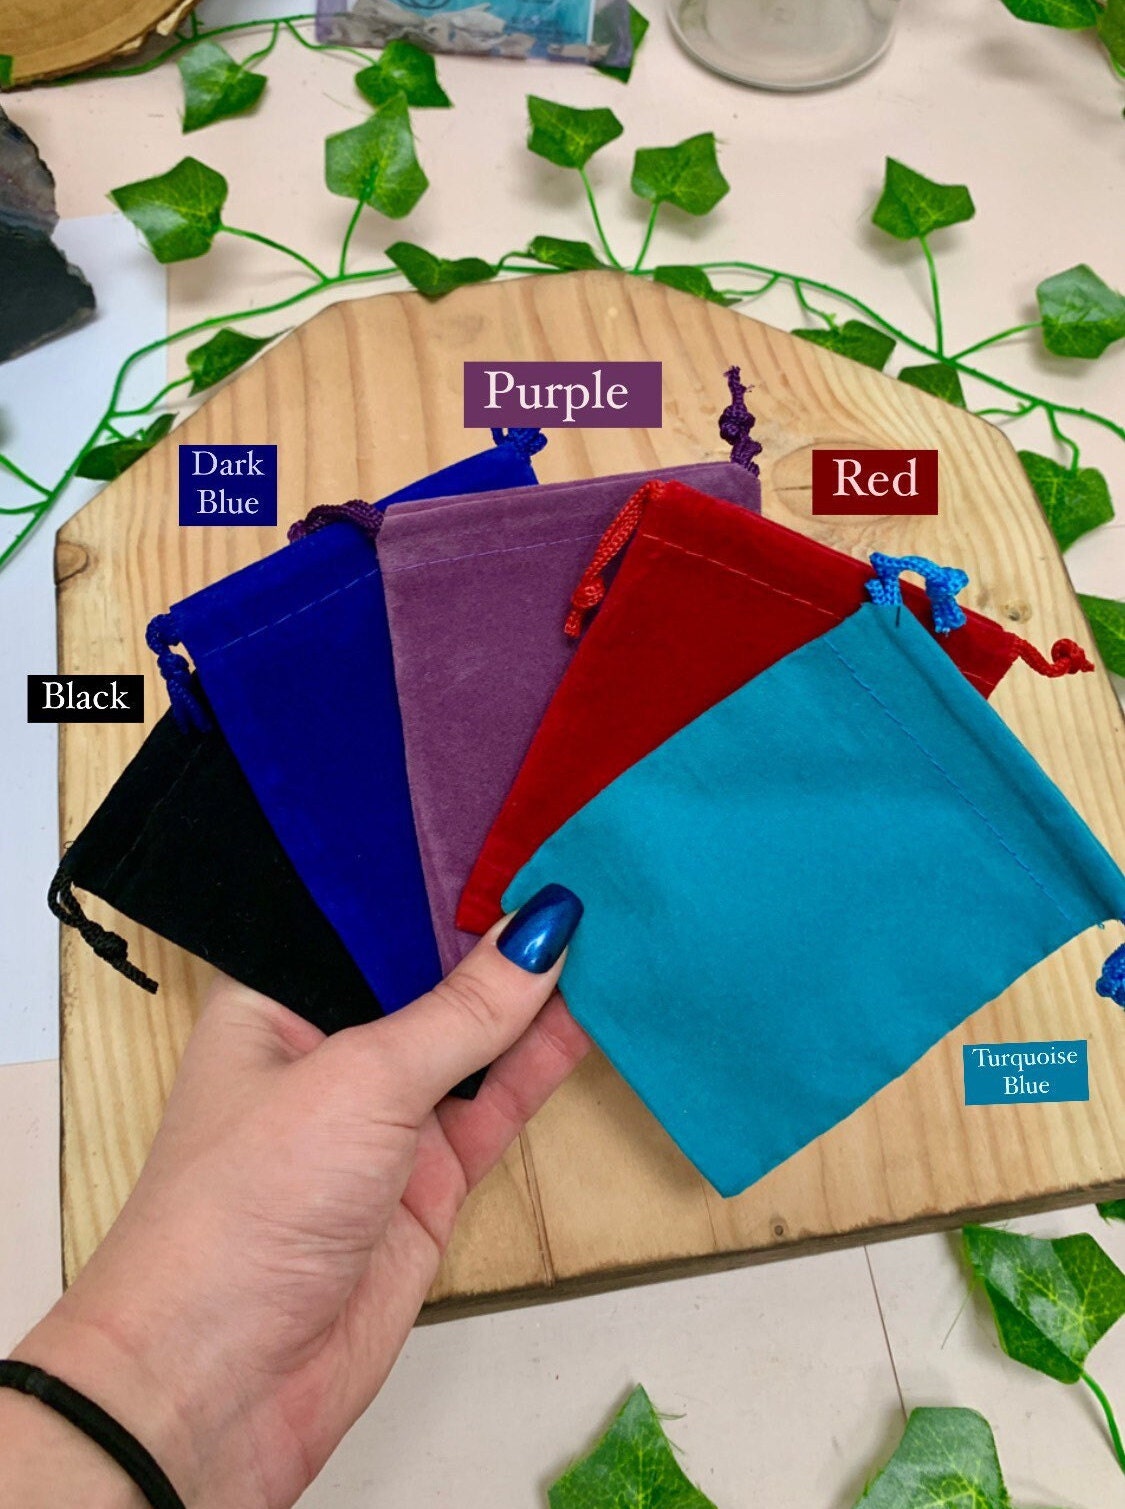 Drawstring Bags Small Jewelry Bags Soft Velvet Packaging Pouches Pouch Bag  Cosmetic Top Grade Velvet 8*10CM 7 Color Options